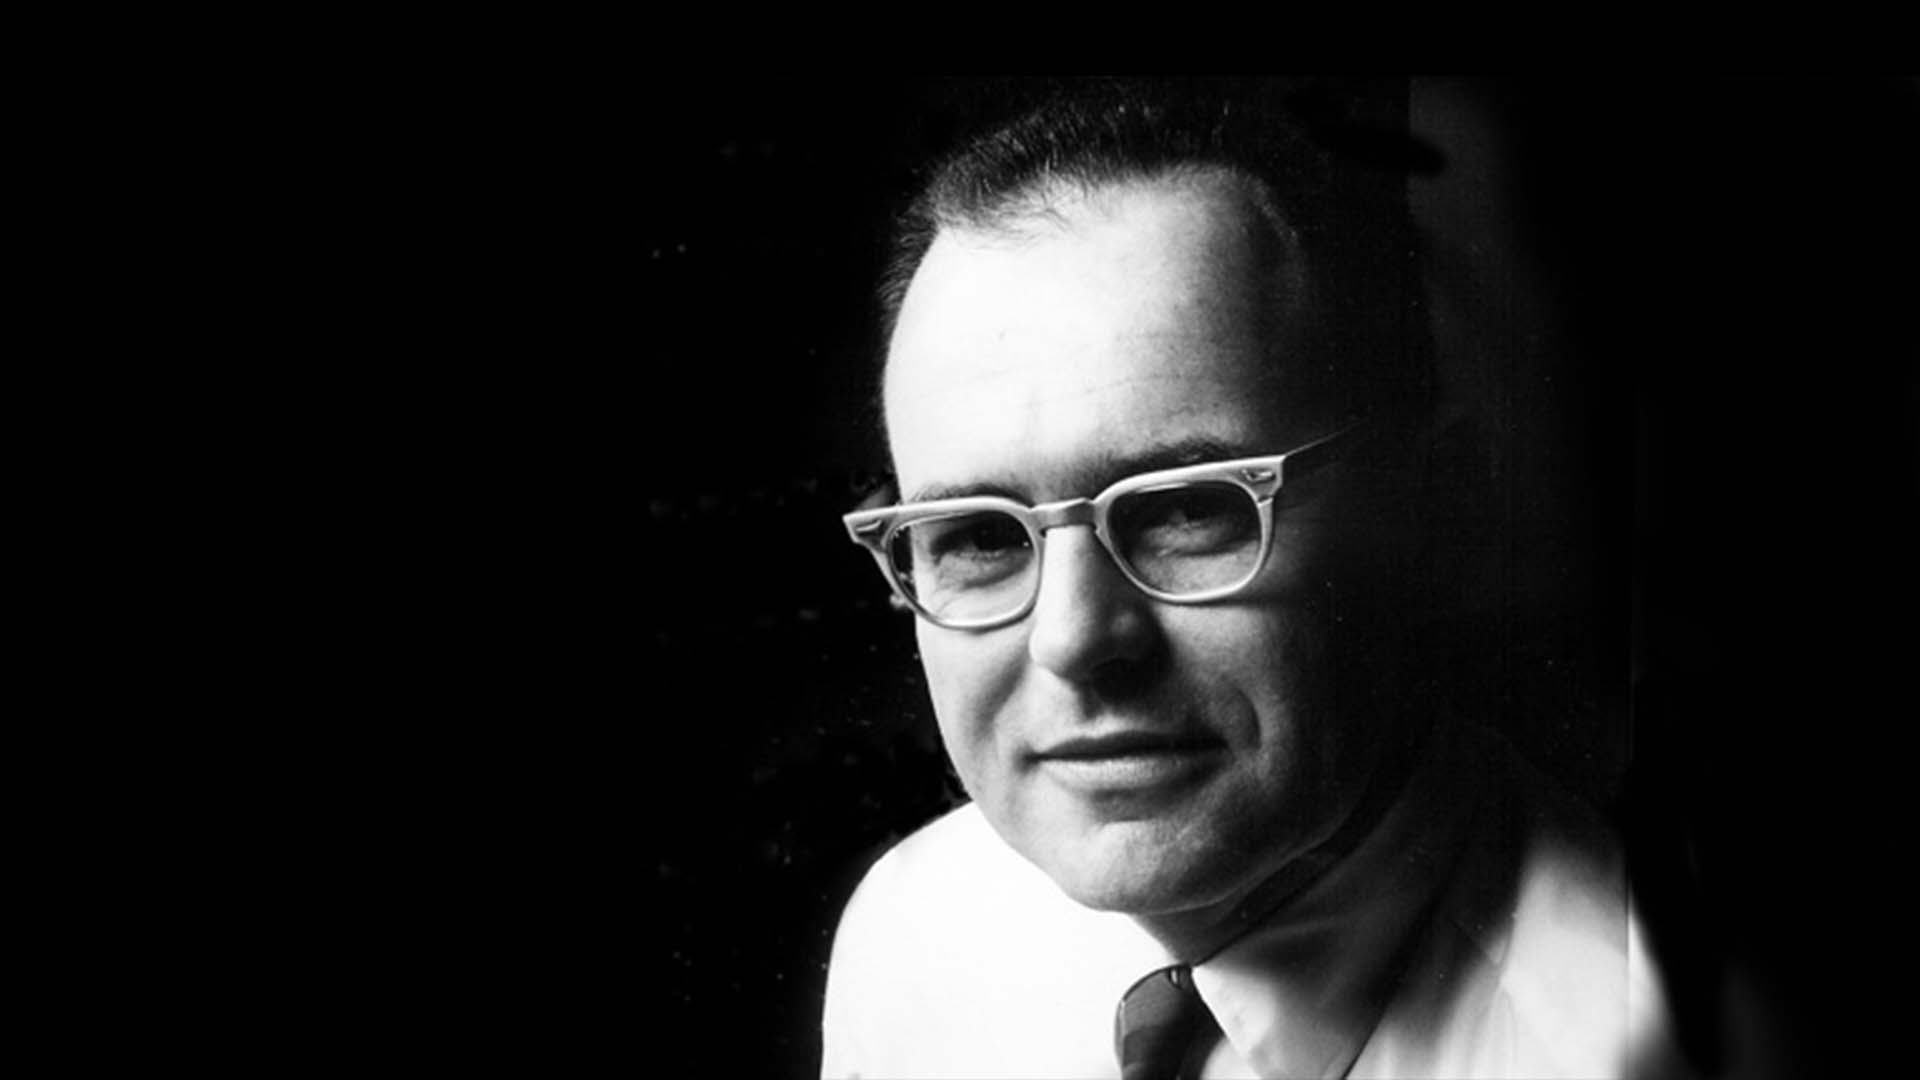 Gordon Moore, Intel Co-Founder and Creator of Moore's Law, Dies at Age 94